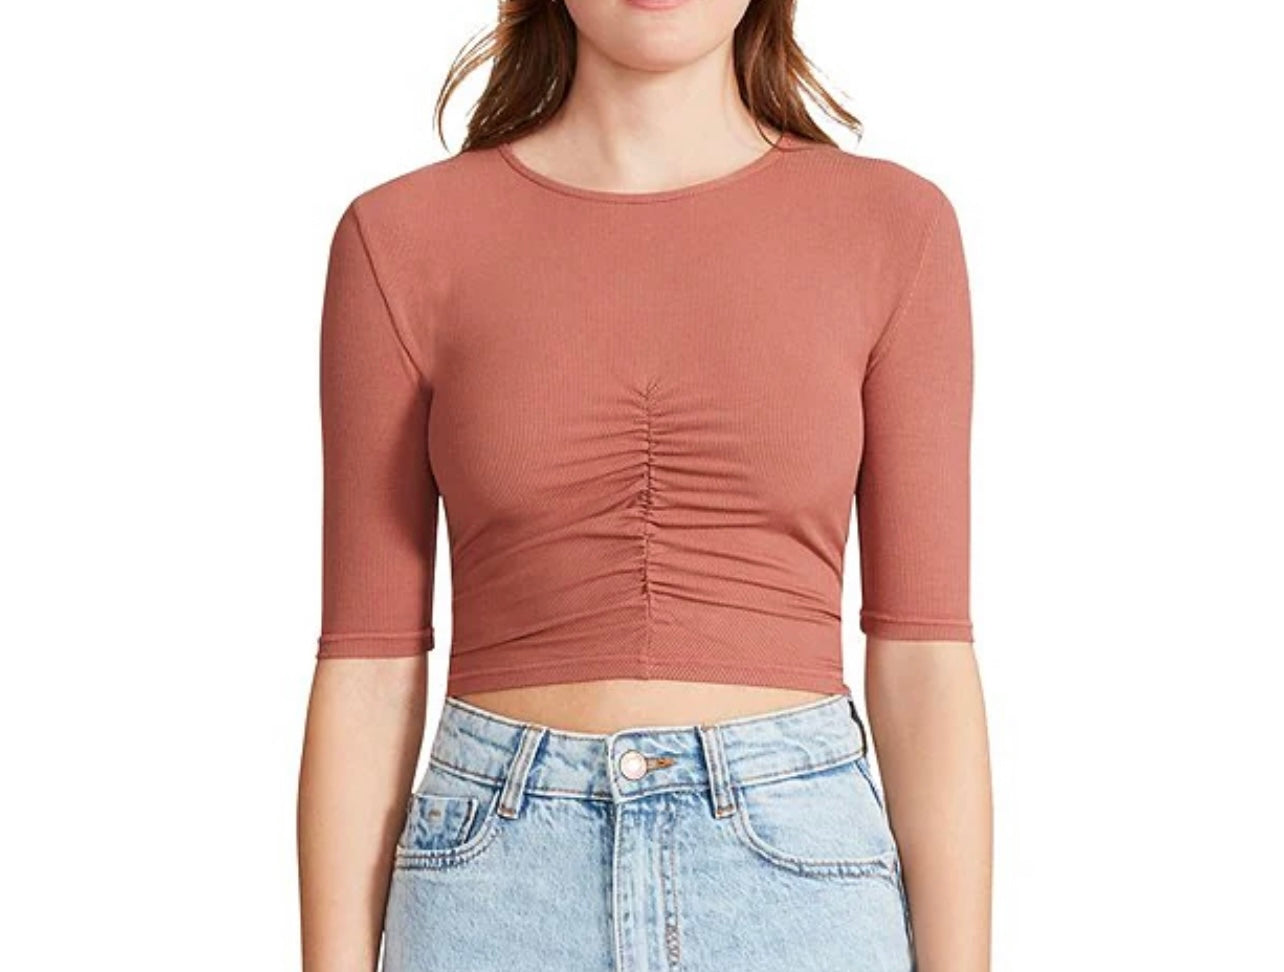 Chasing Waterfall Crew Neck Cinched Front Elbow Short Sleeve Crop Top